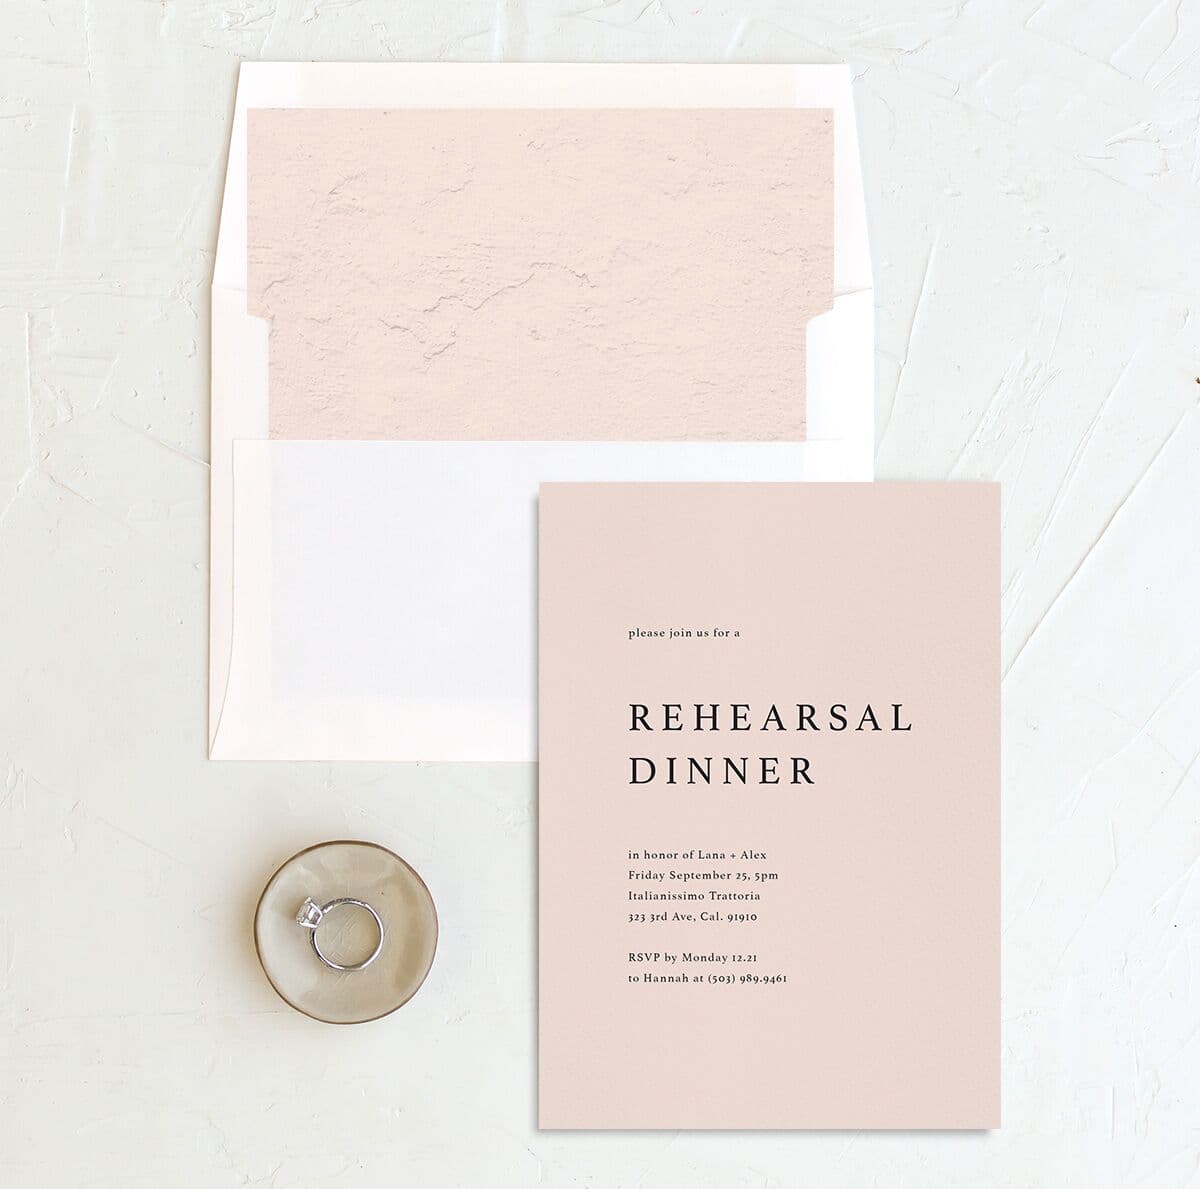 Modern Chic Rehearsal Dinner Invitations envelope-and-liner in pink